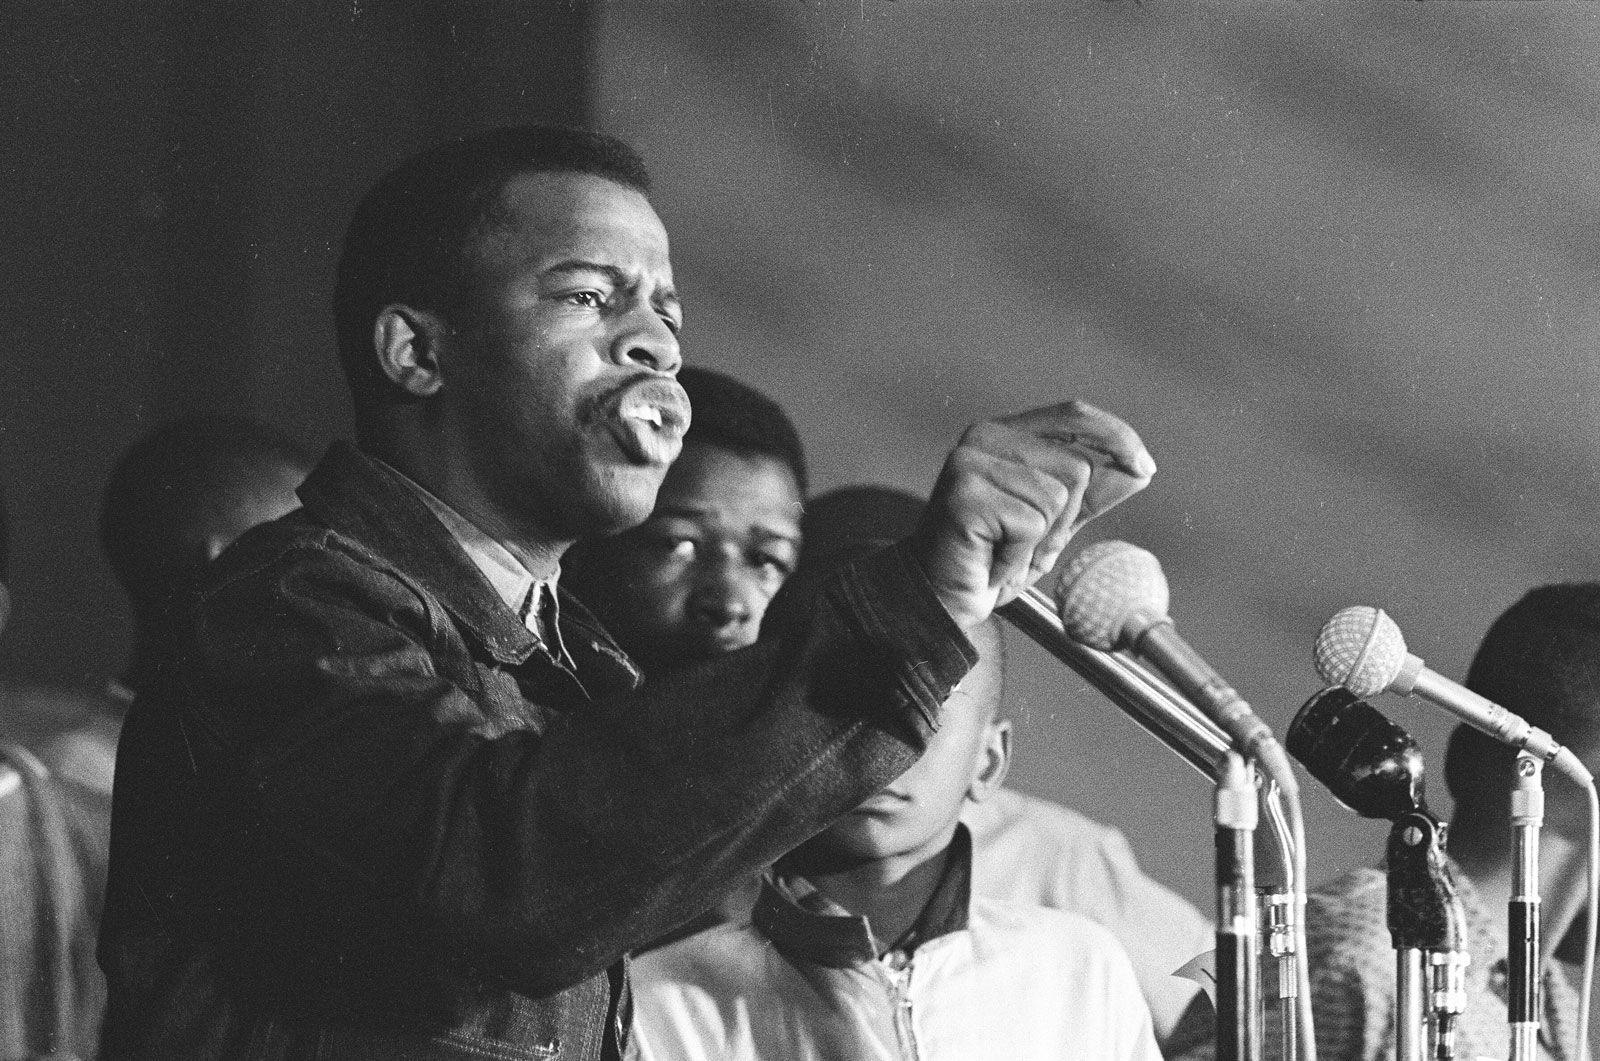 John Lewis speaking at a Student Nonviolent Coordinating Committee (SNCC) event in Greenwood, Mississippi, 1963 